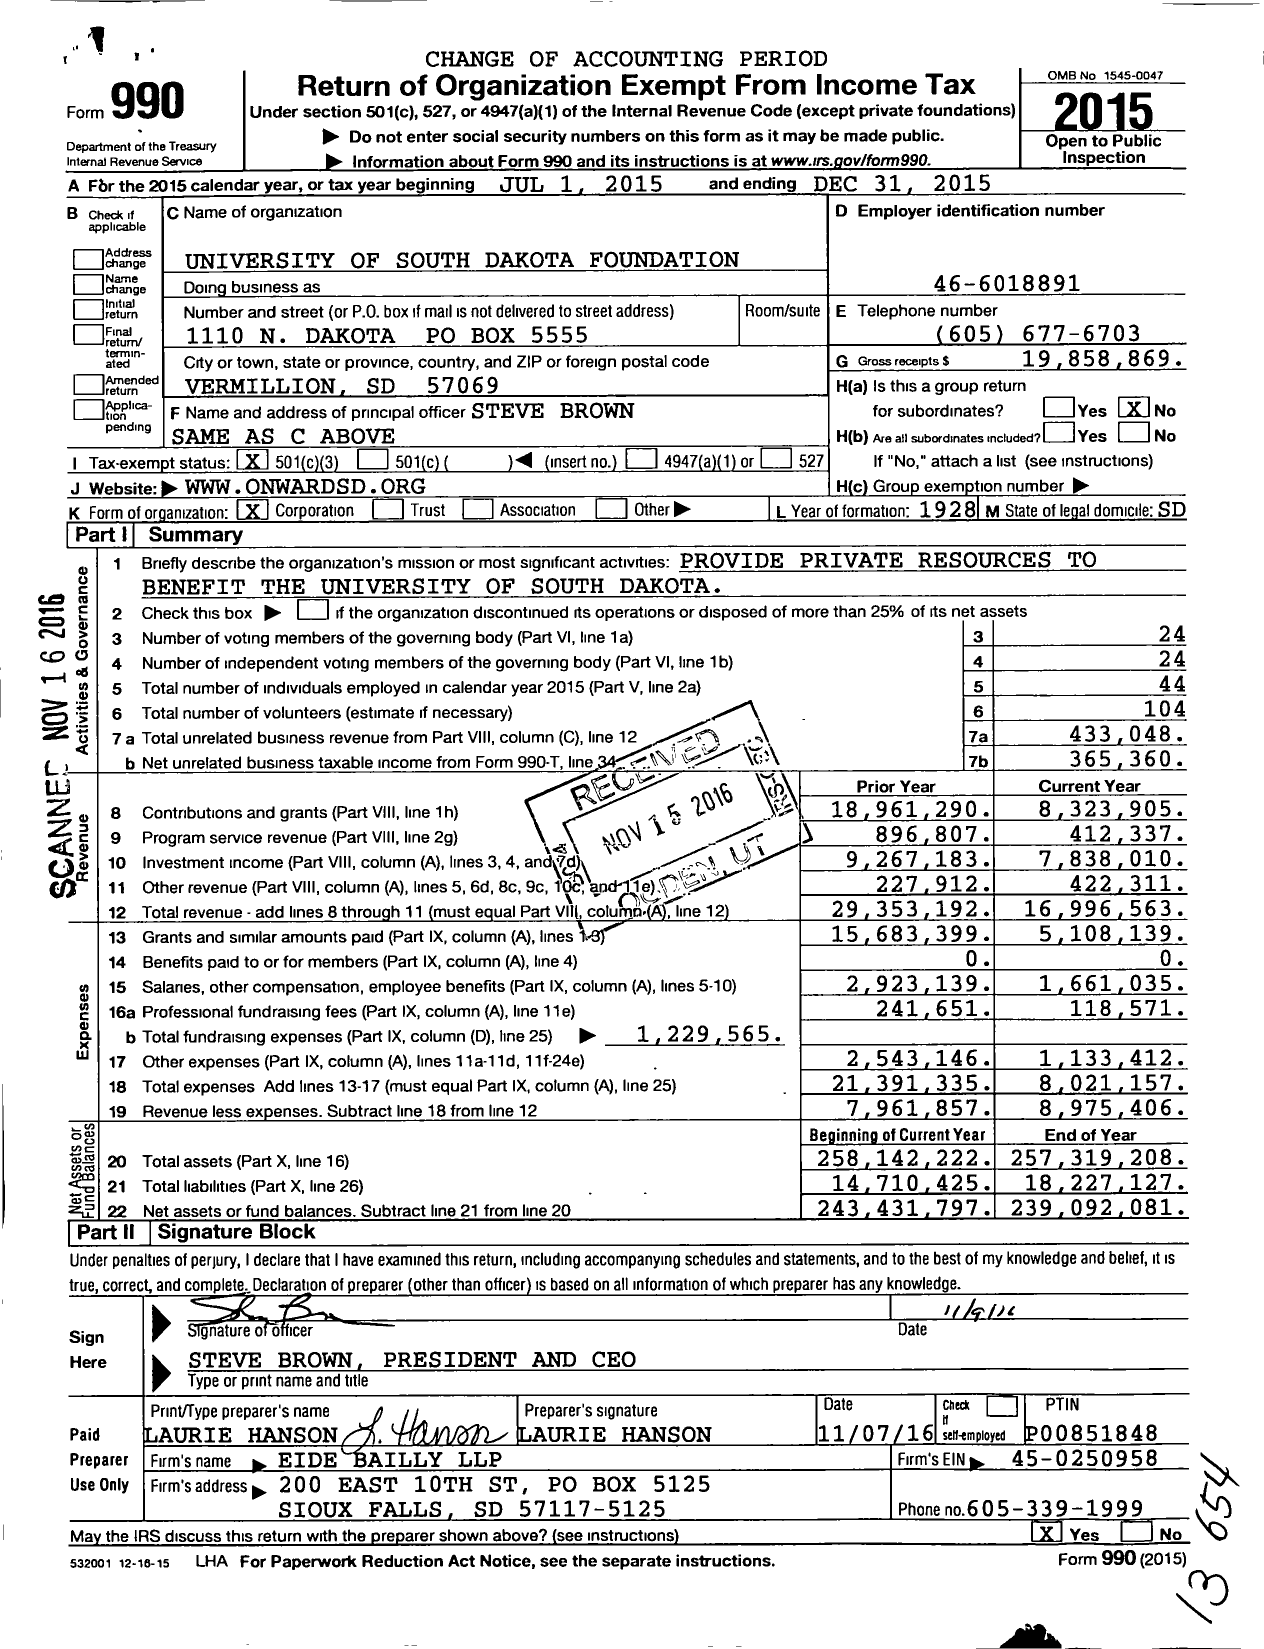 Image of first page of 2015 Form 990 for University of South Dakota Foundation (USDF)